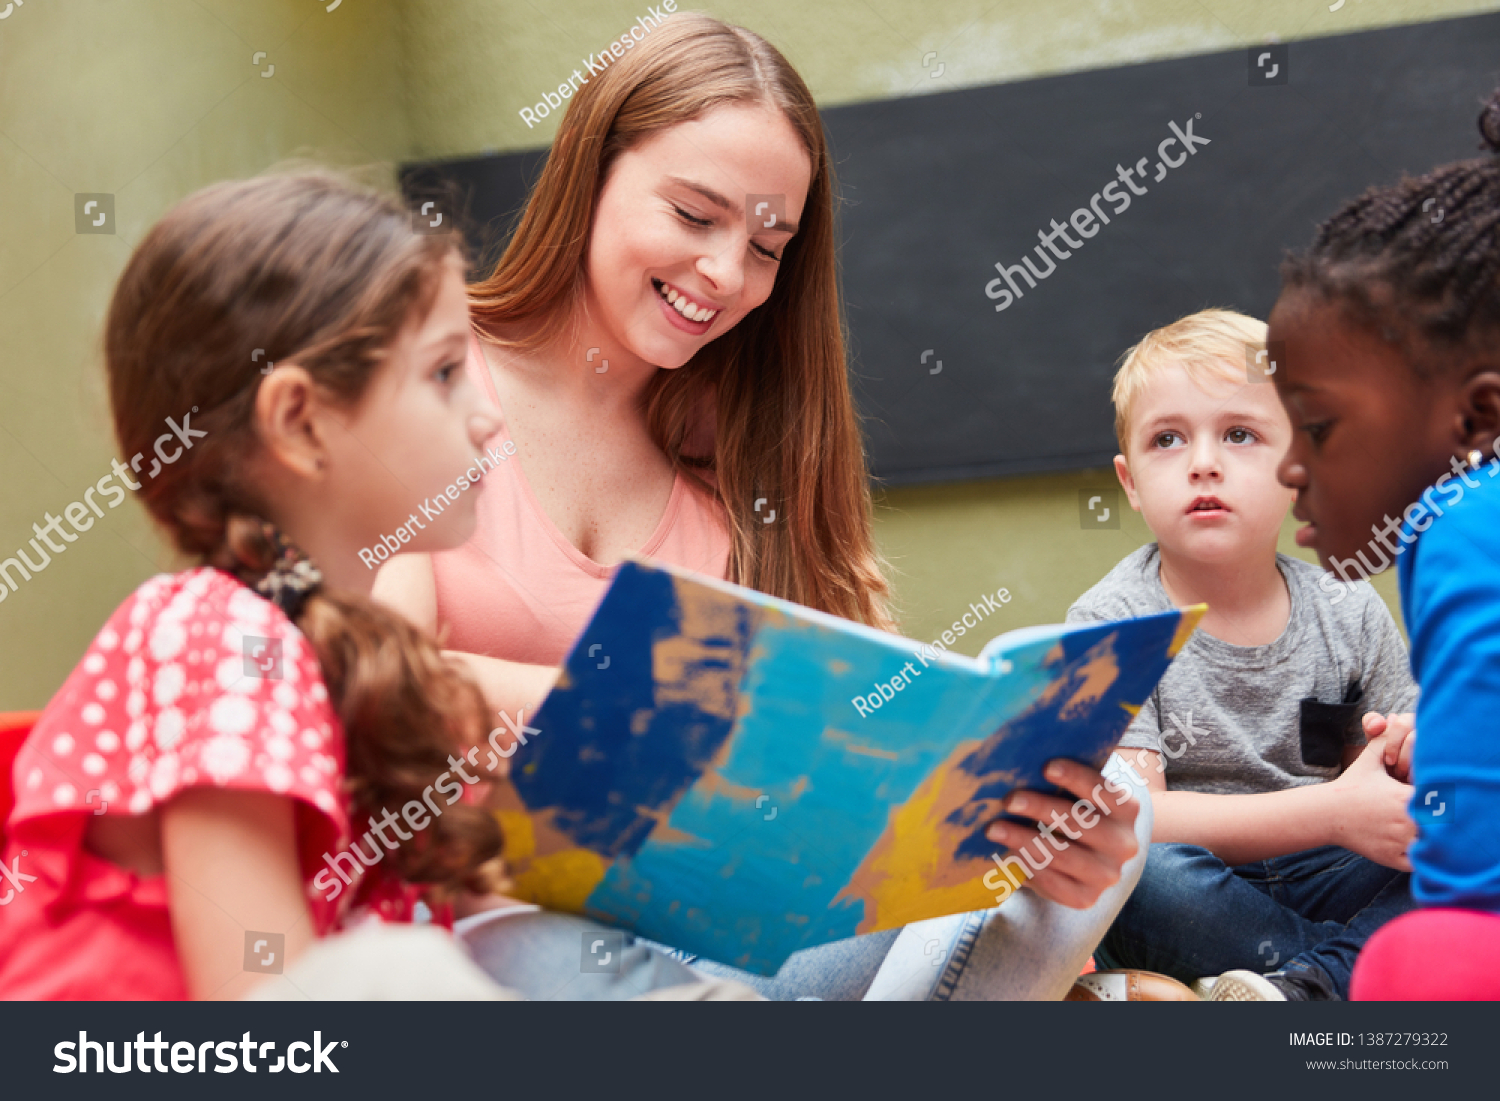 Group of children and educators reading from a children's book or storybook #1387279322